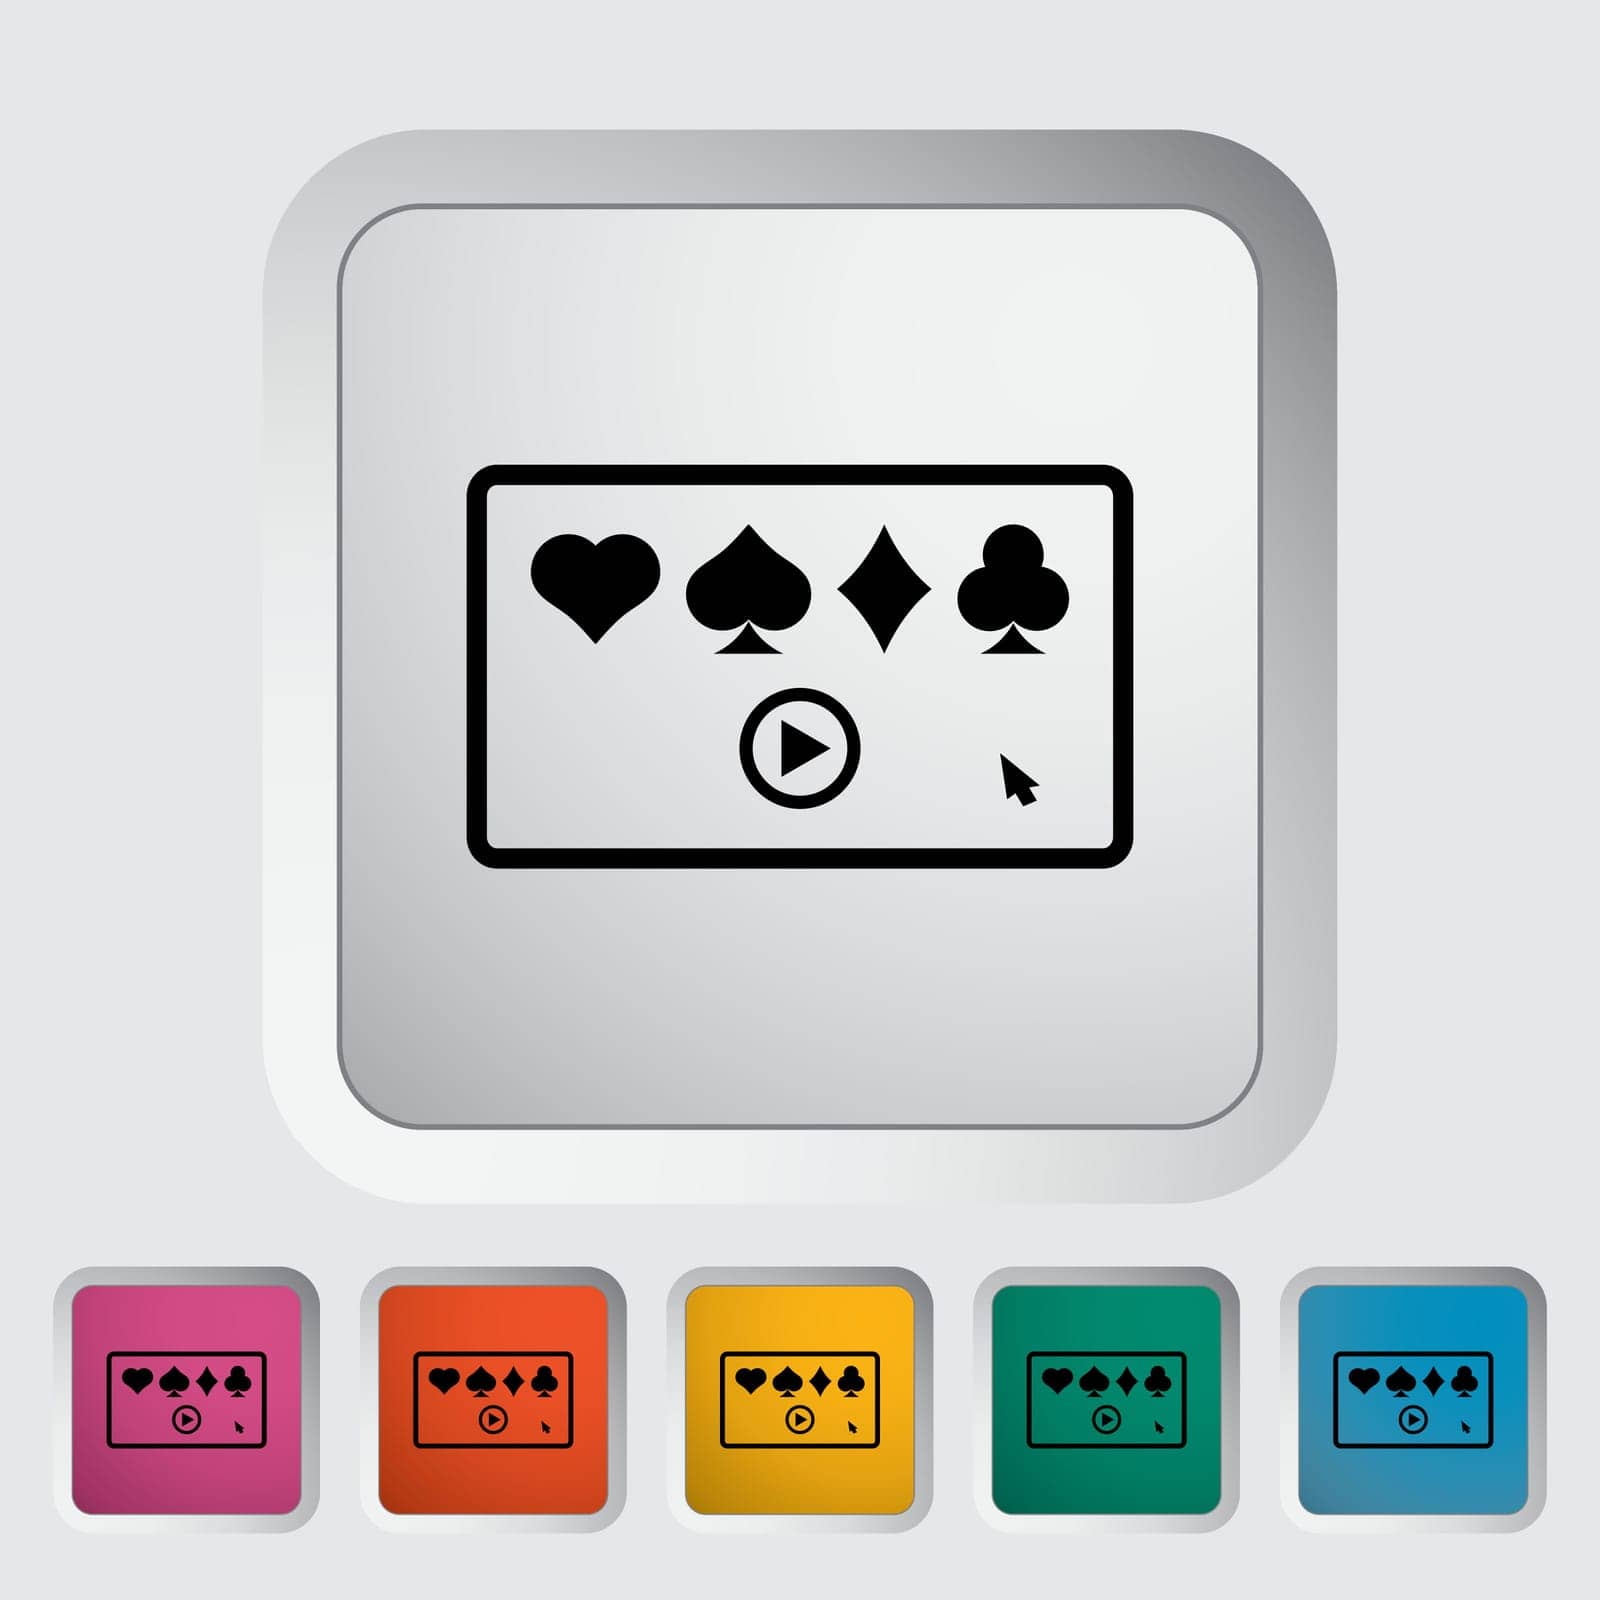 Video game. Single flat icon on the button. Vector illustration.